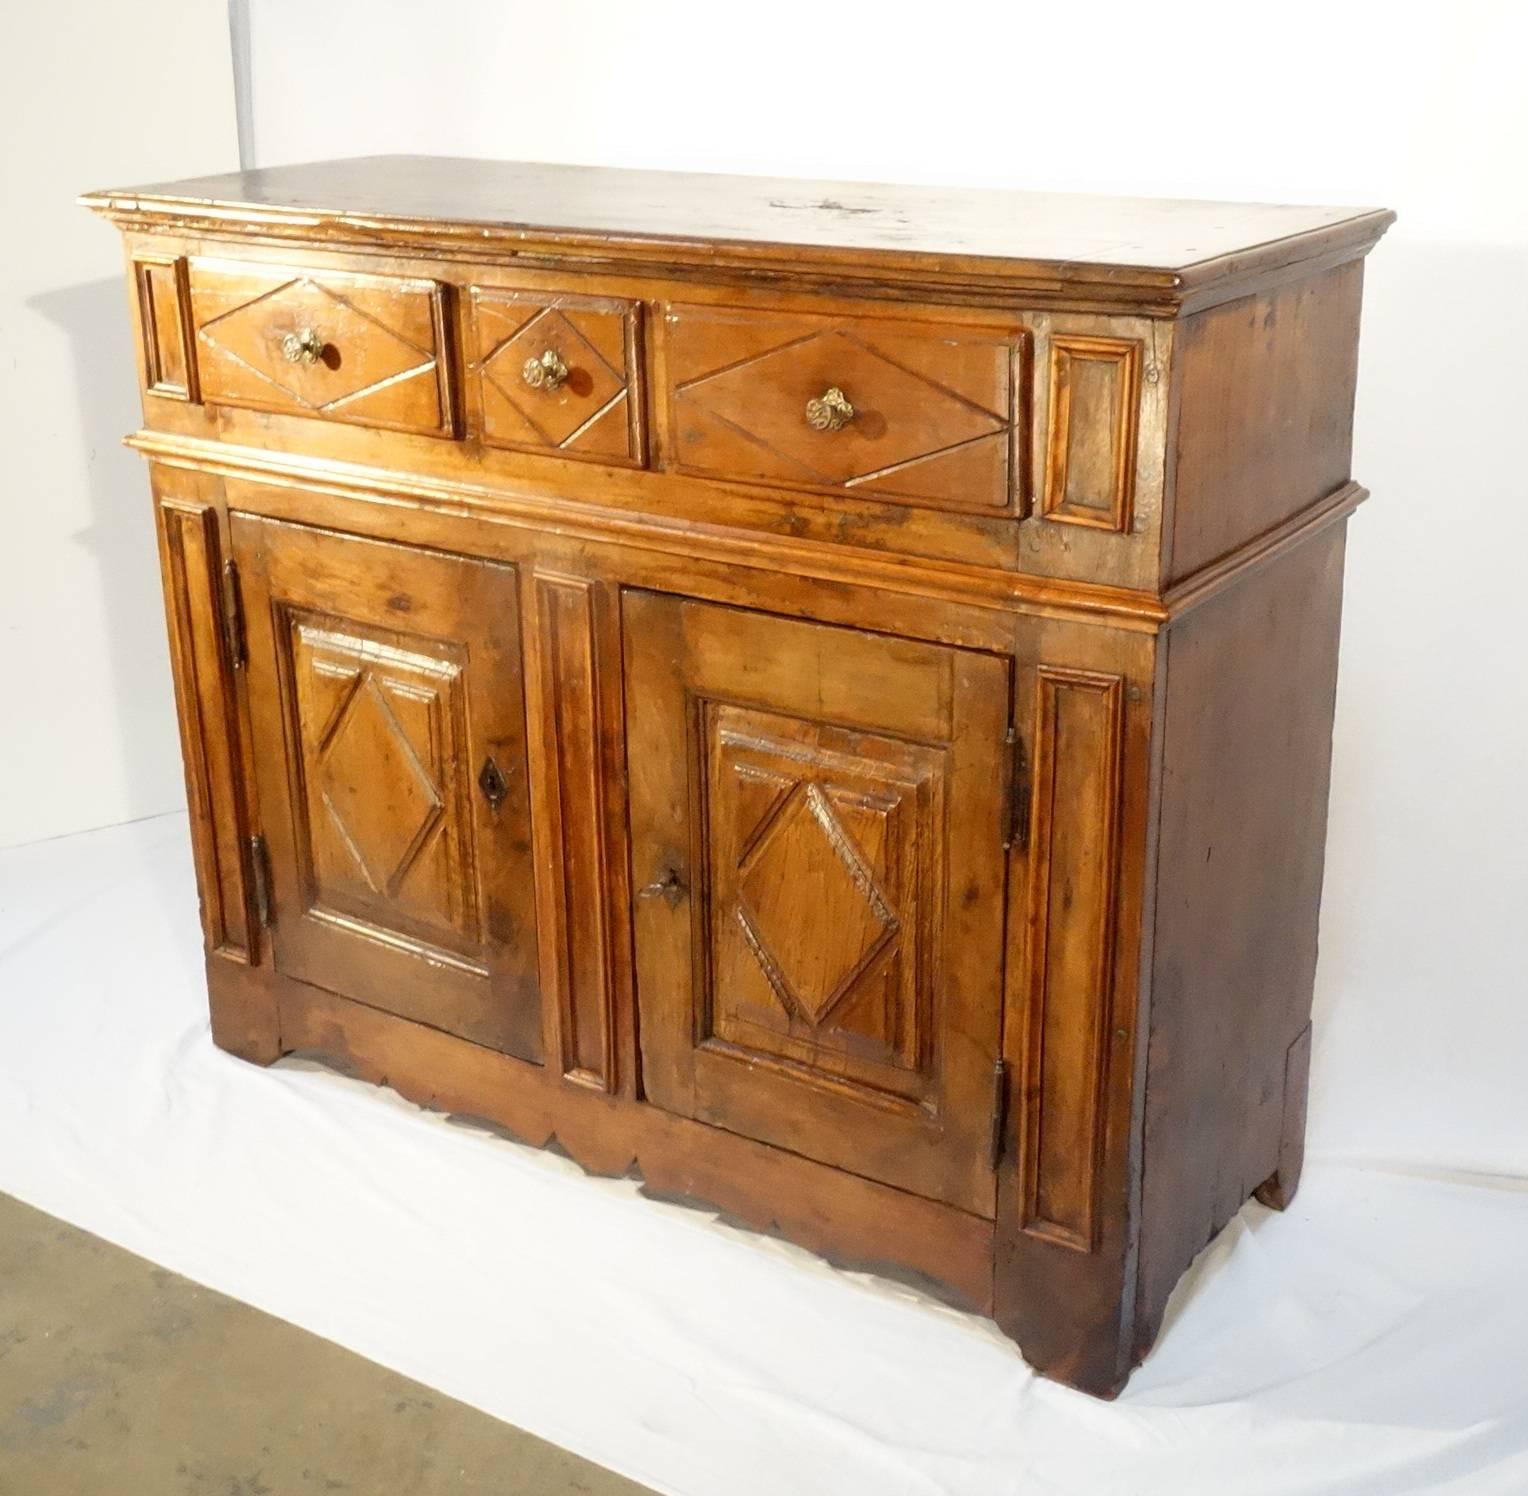 Elegant and clean Tuscan credenza, 17th century style, solid walnut with three-drawer on the top and two-door. Diamond shape door, Classic elegant molding and geometric lines make it a really charming piece, circa 1880.

Measures: 49.75" W x